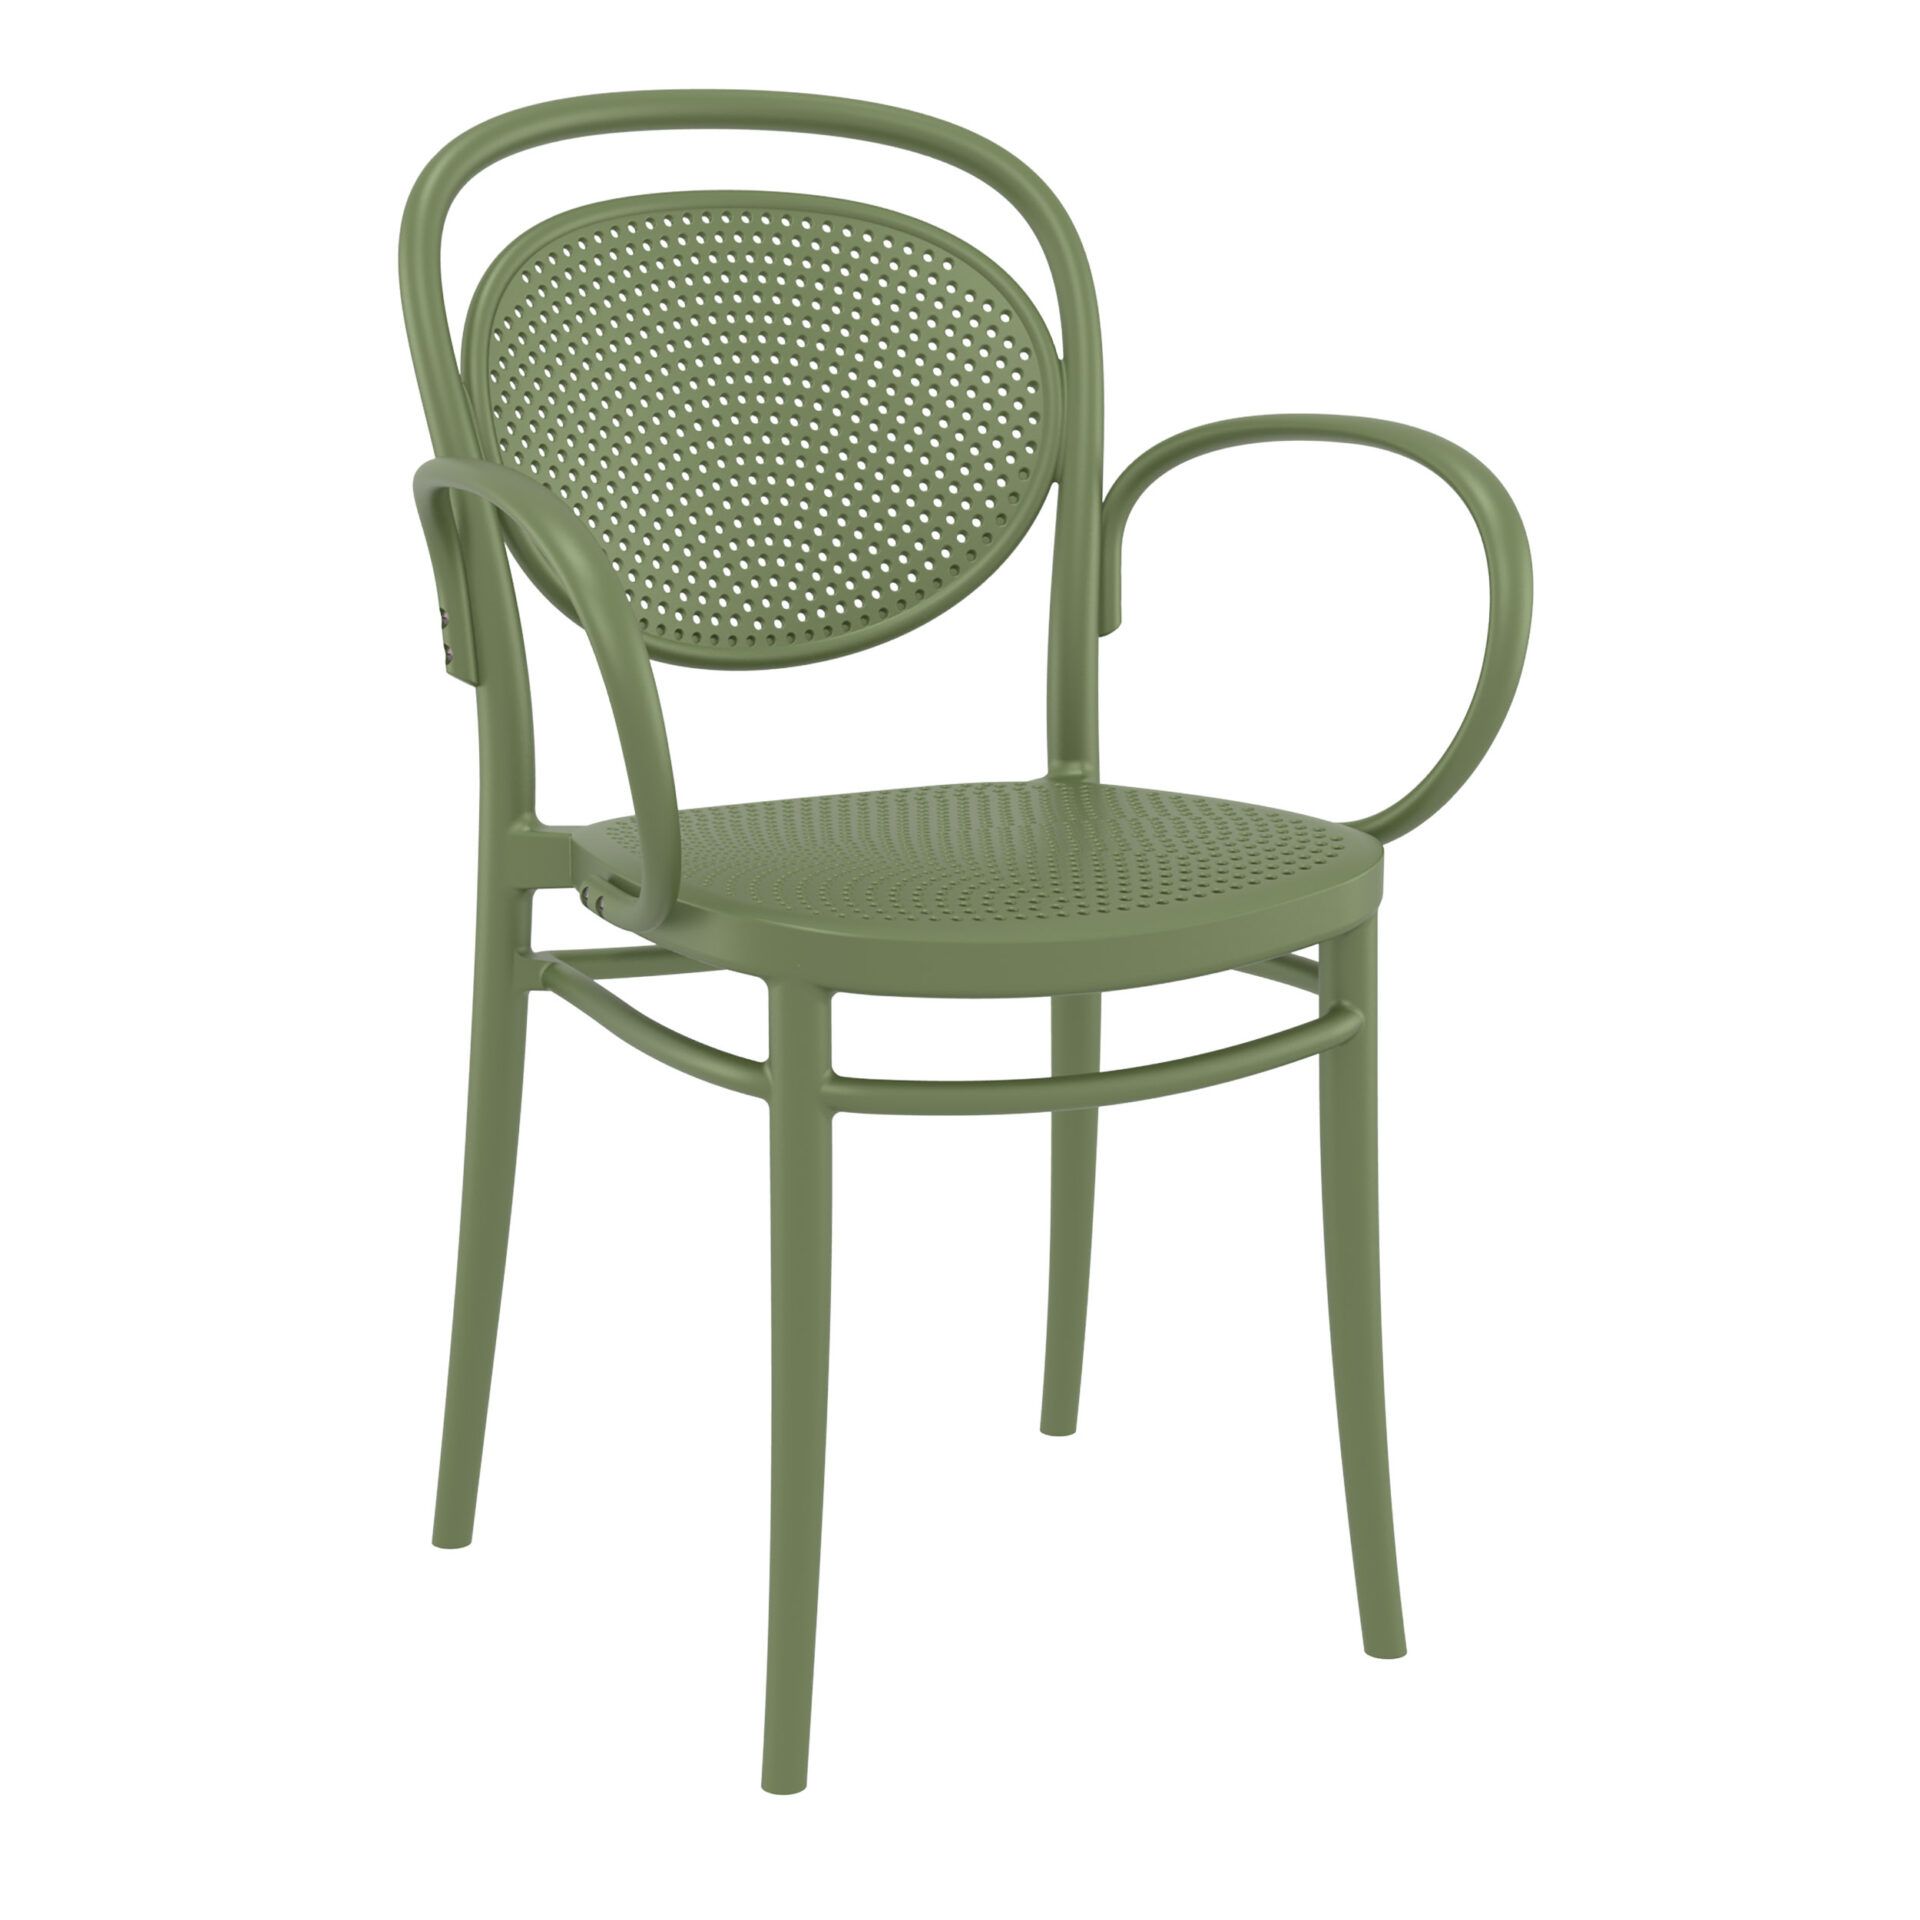 Marcel XL Chair - Olive Green